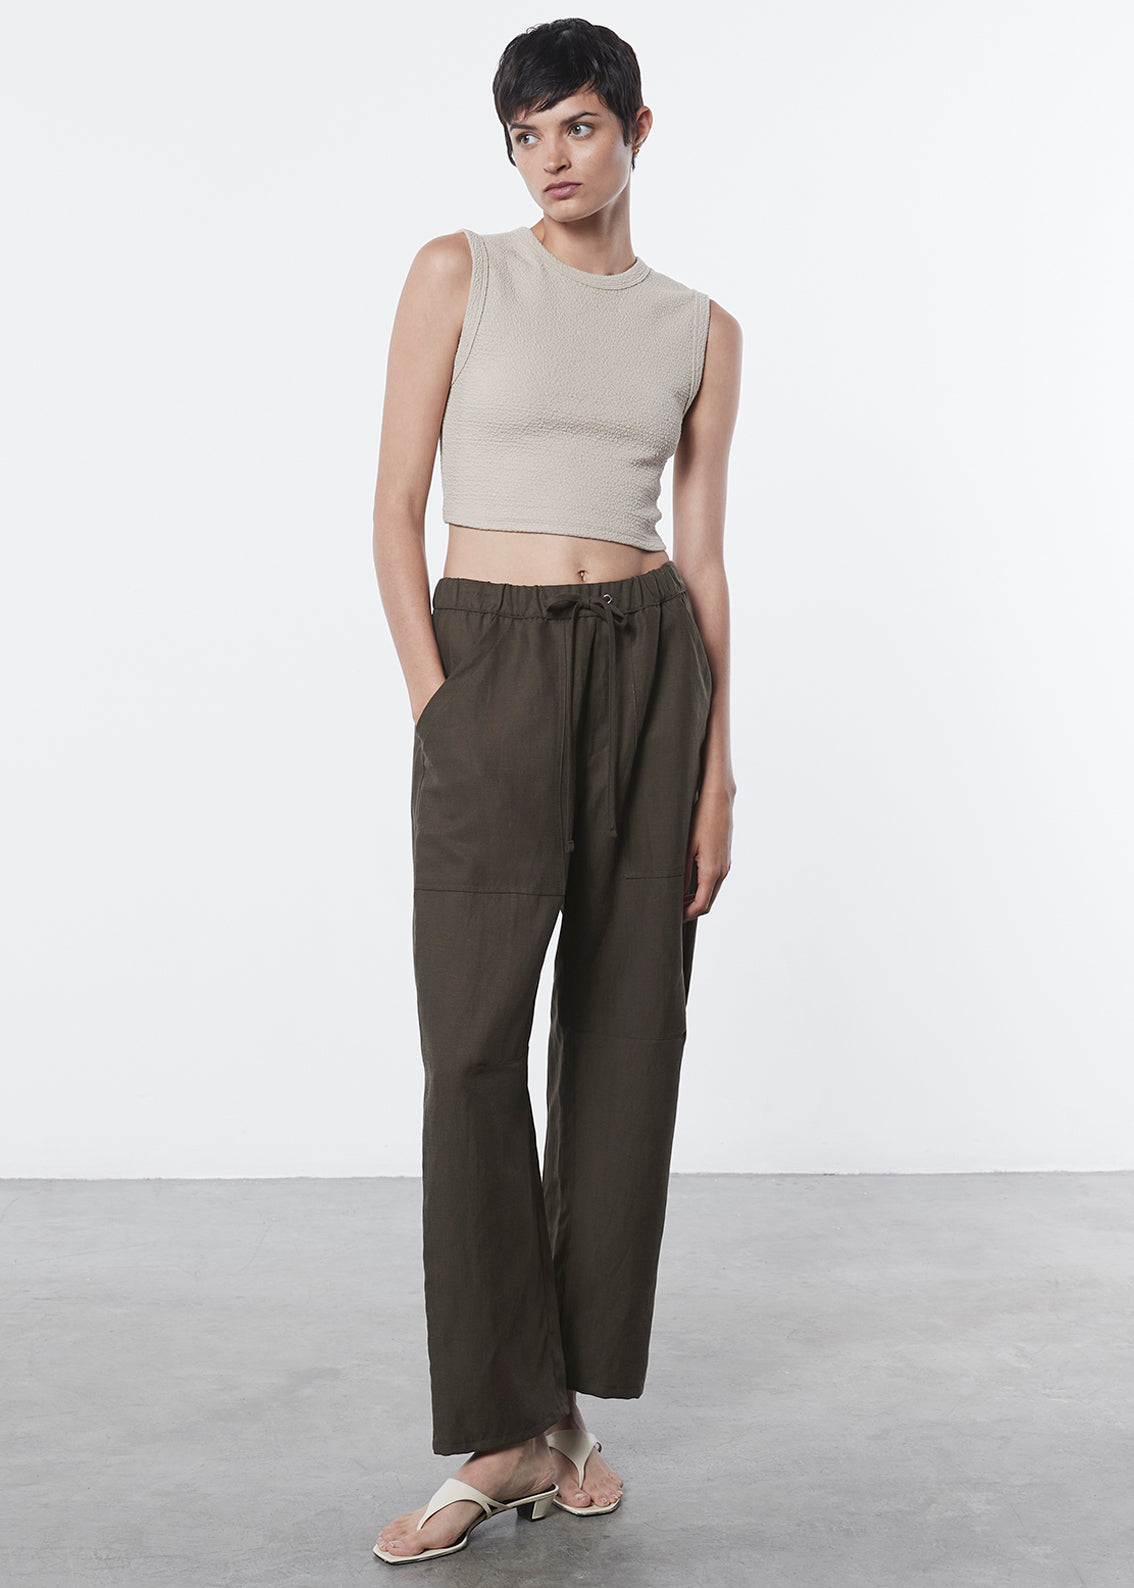 Twill Utility Pant | Military